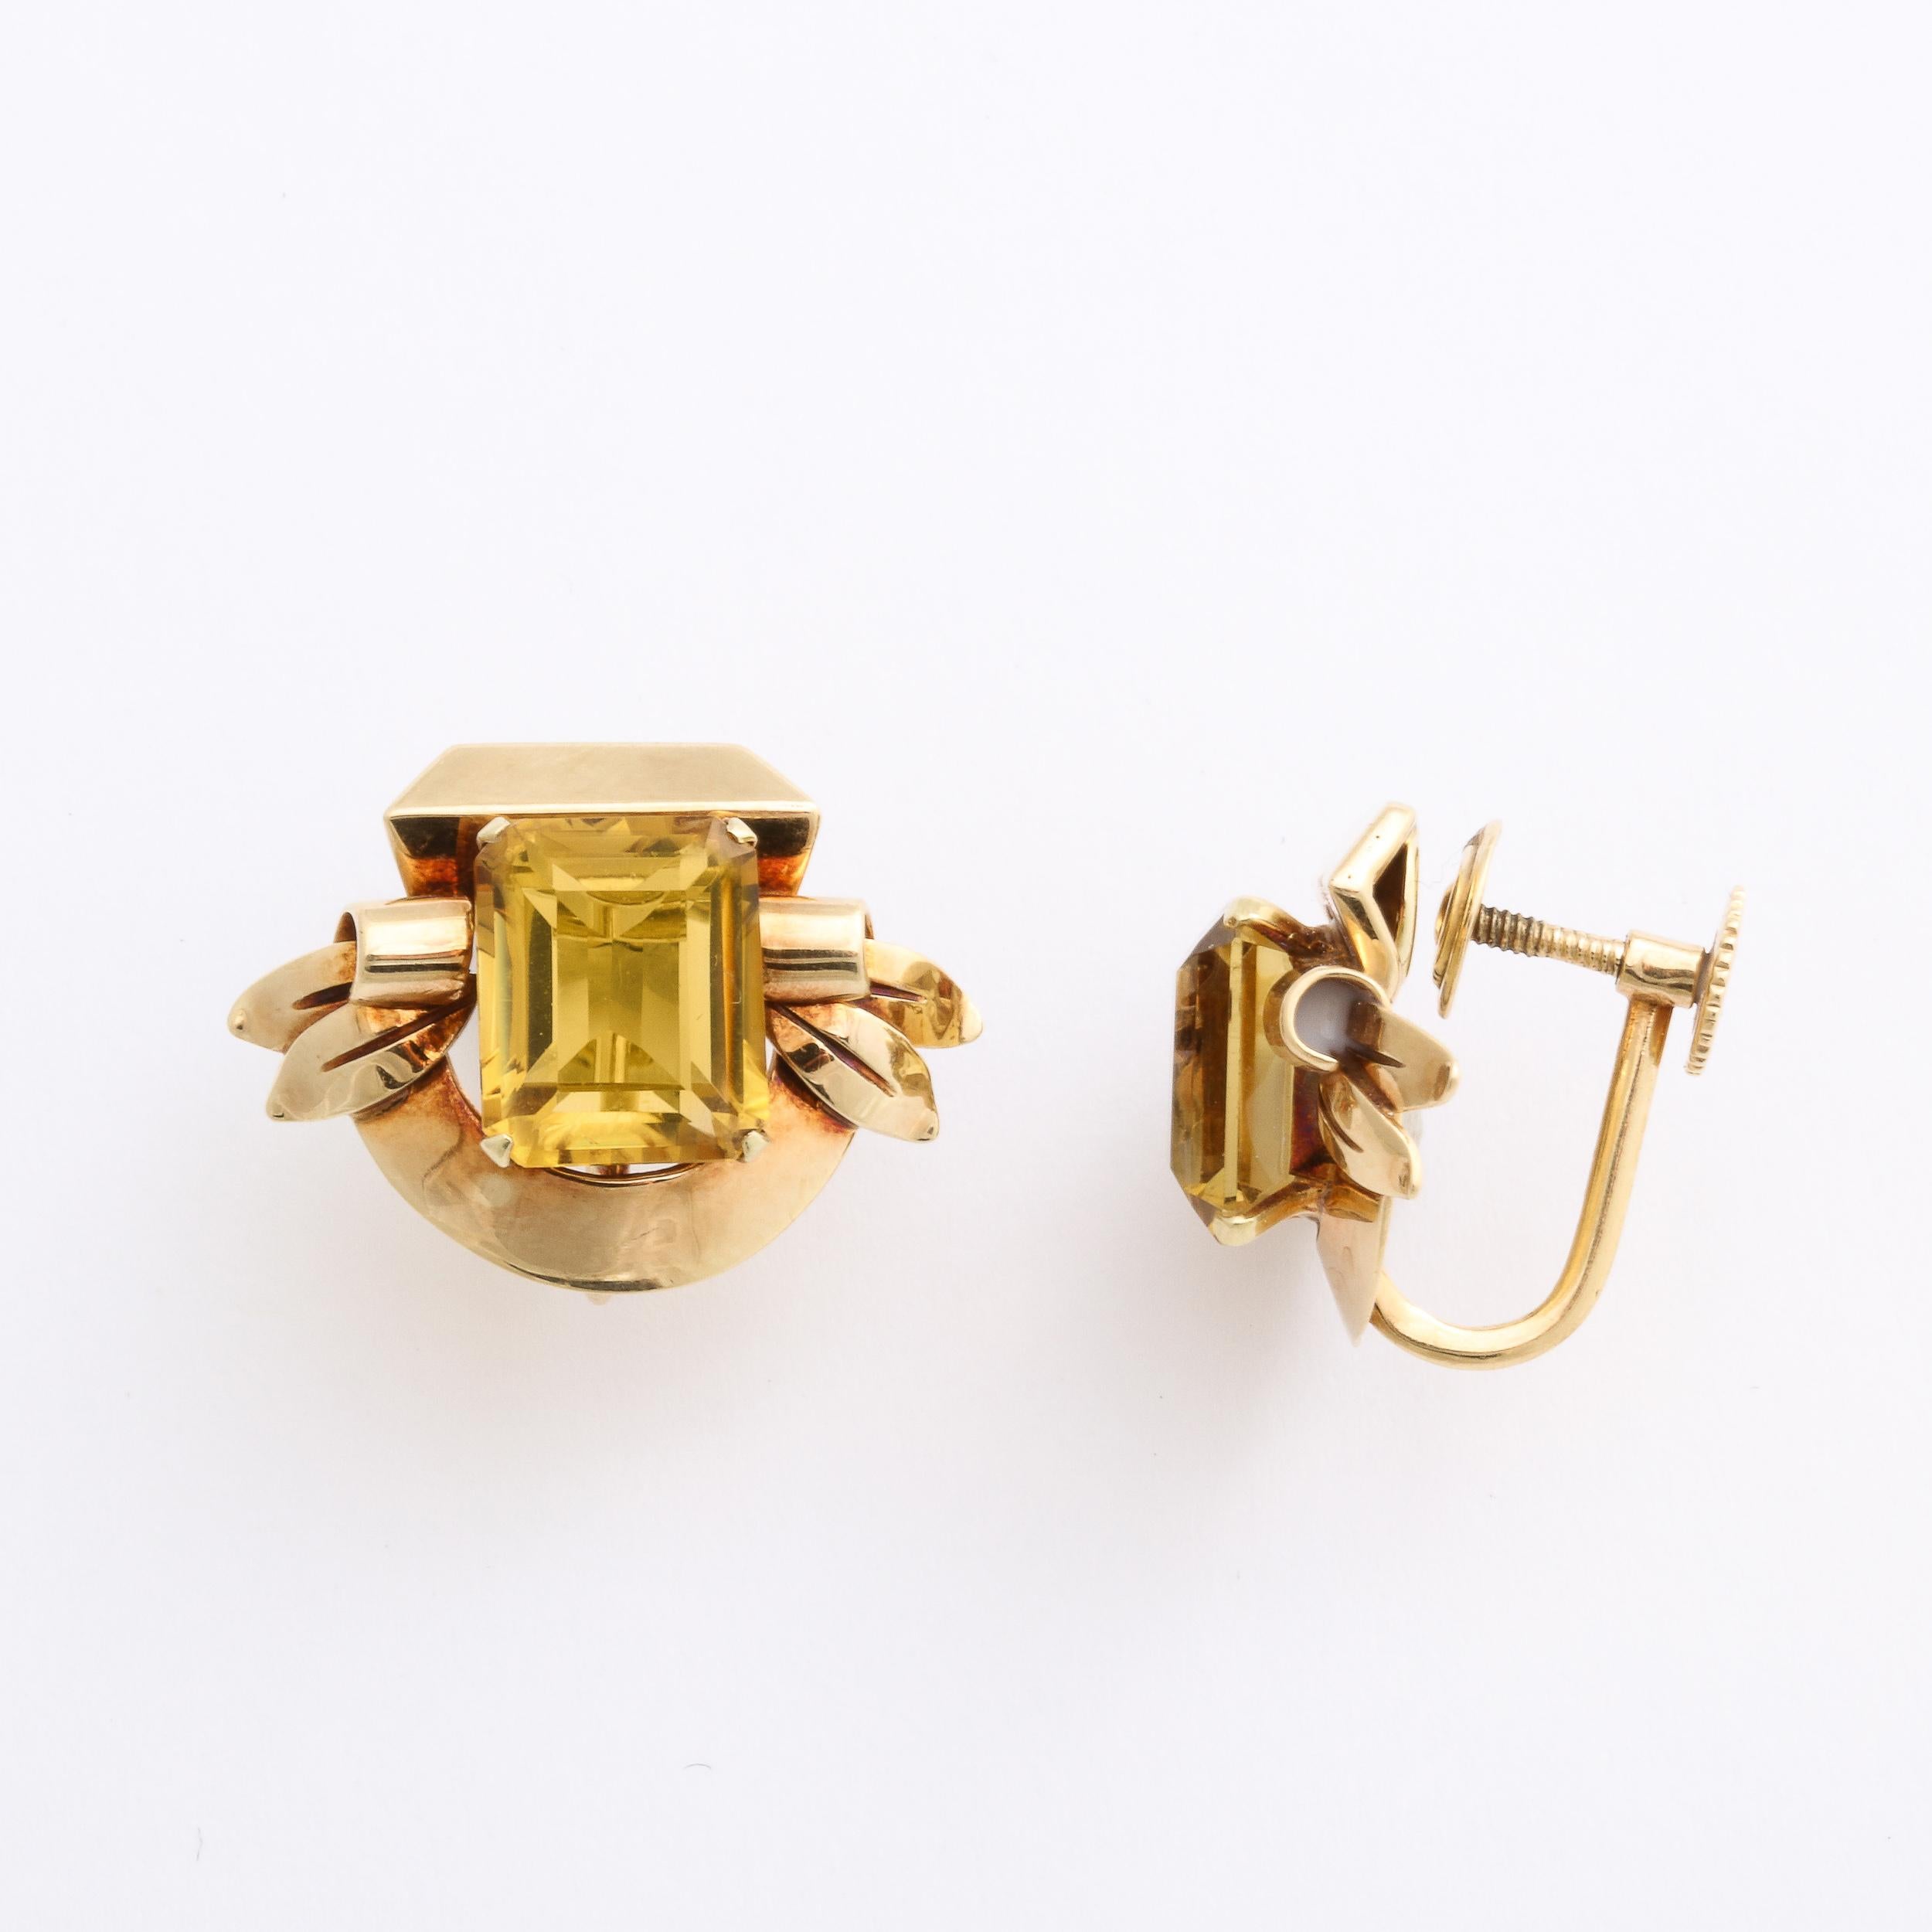 Art Deco  Retro. Yellow Gold & Emerald Cut Citrine Earrings Signed Cartier  For Sale 5